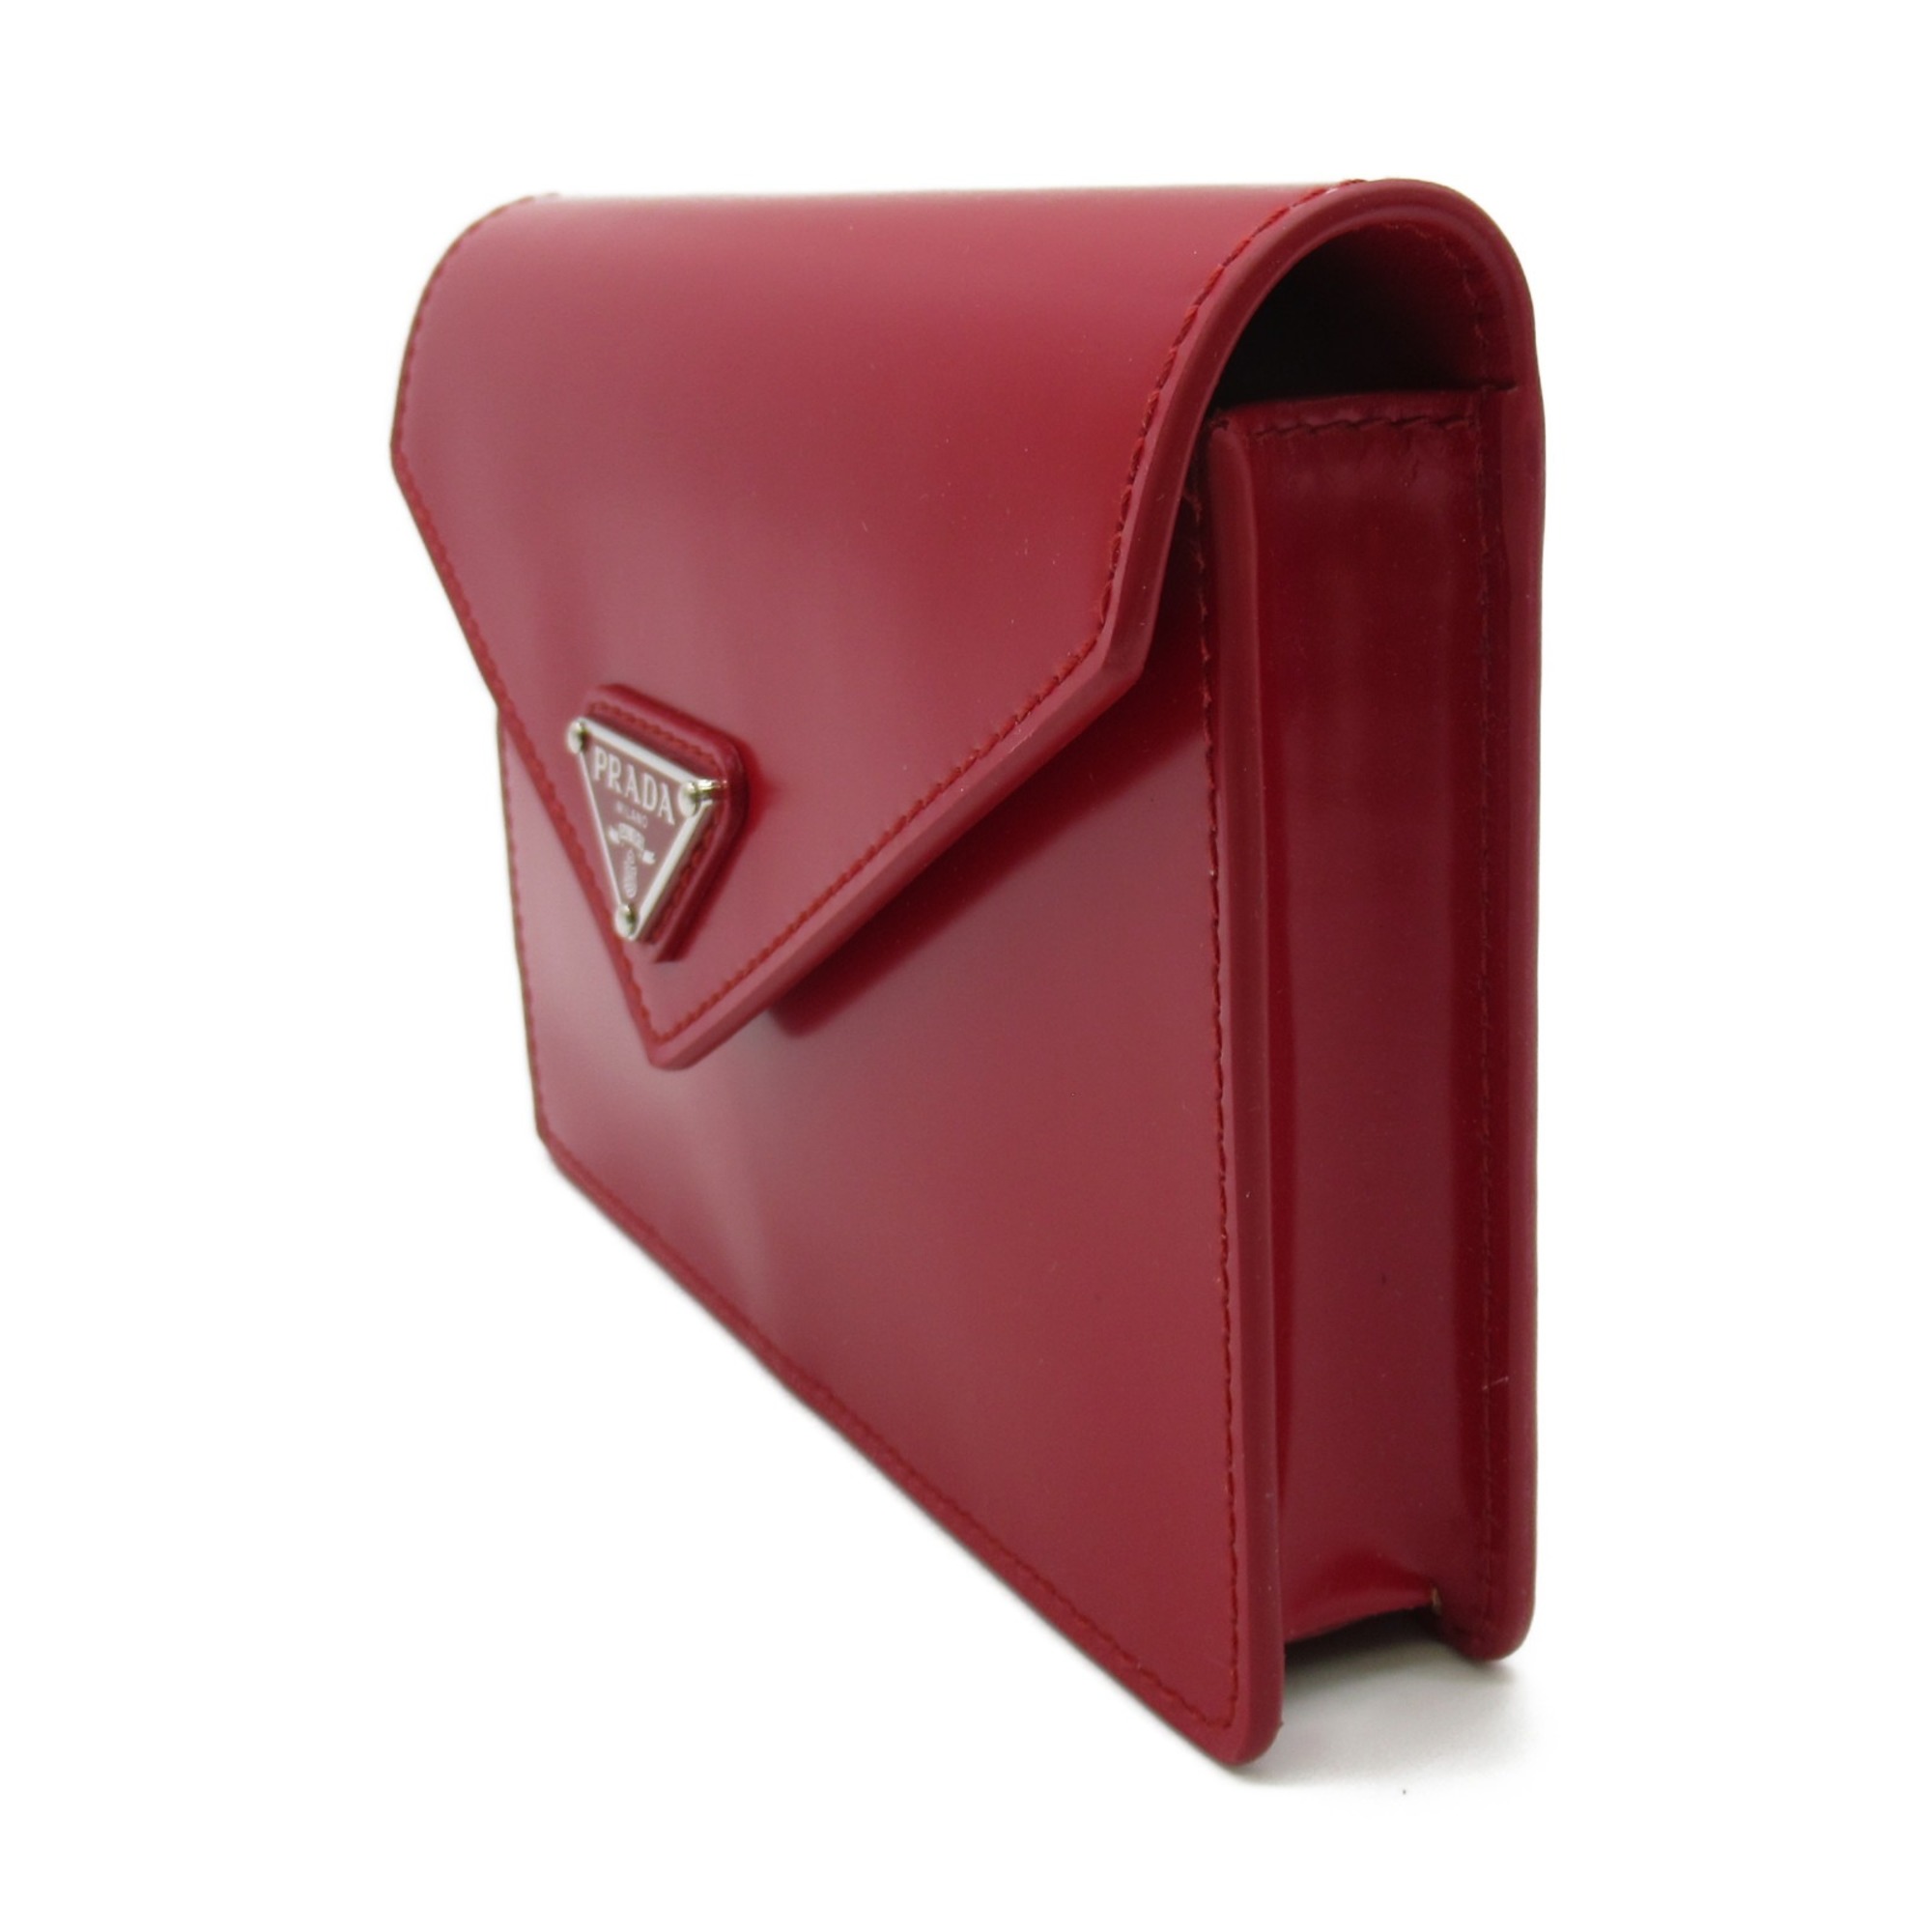 PRADA Pouch with playing cards Red leather 2SC0040DCF0D56